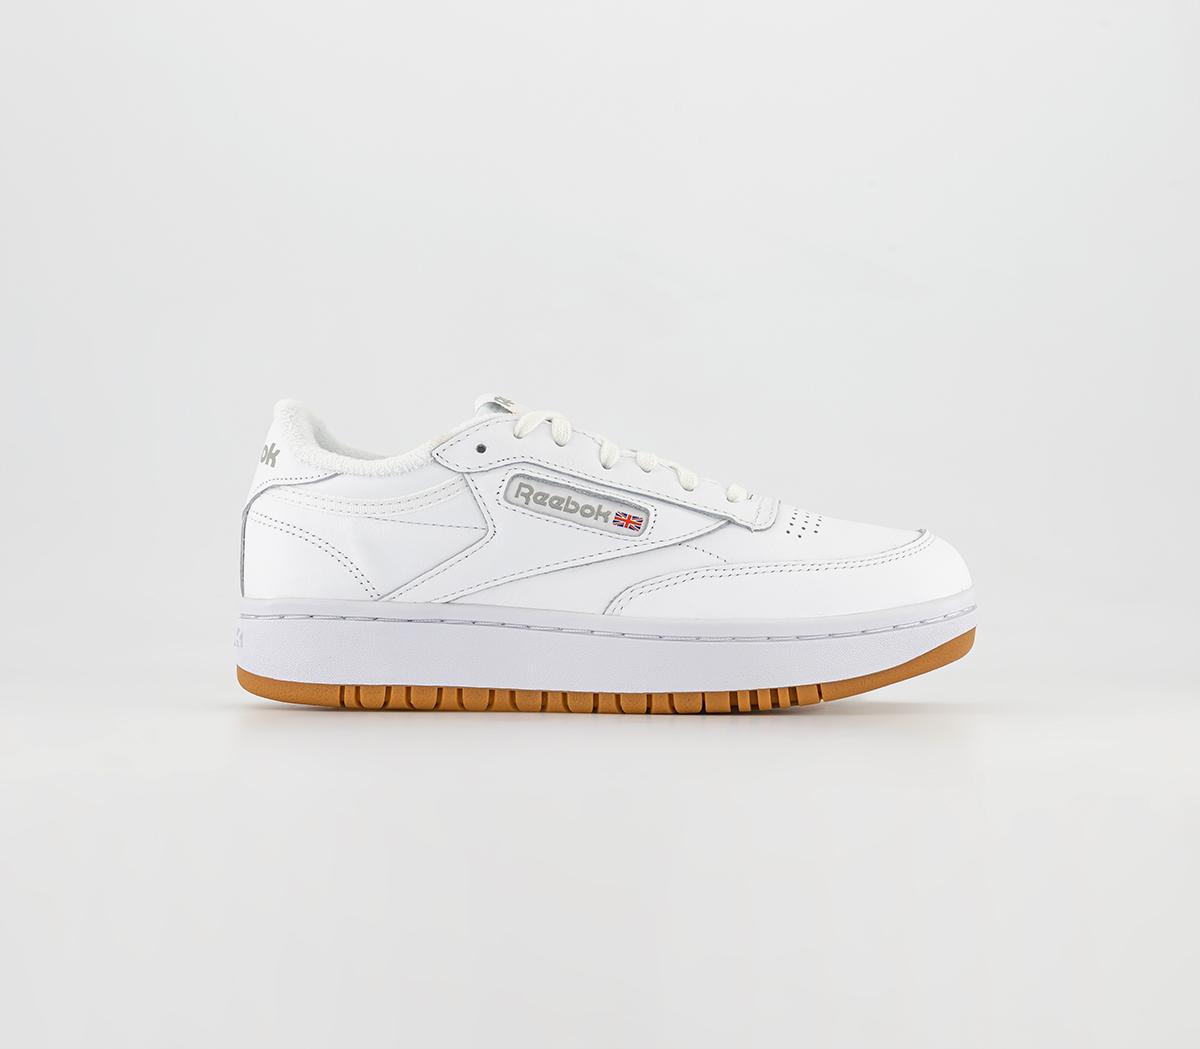 Classic Leather Shoes in Cloud White / Cloud White / Reebok Rubber Gum-02